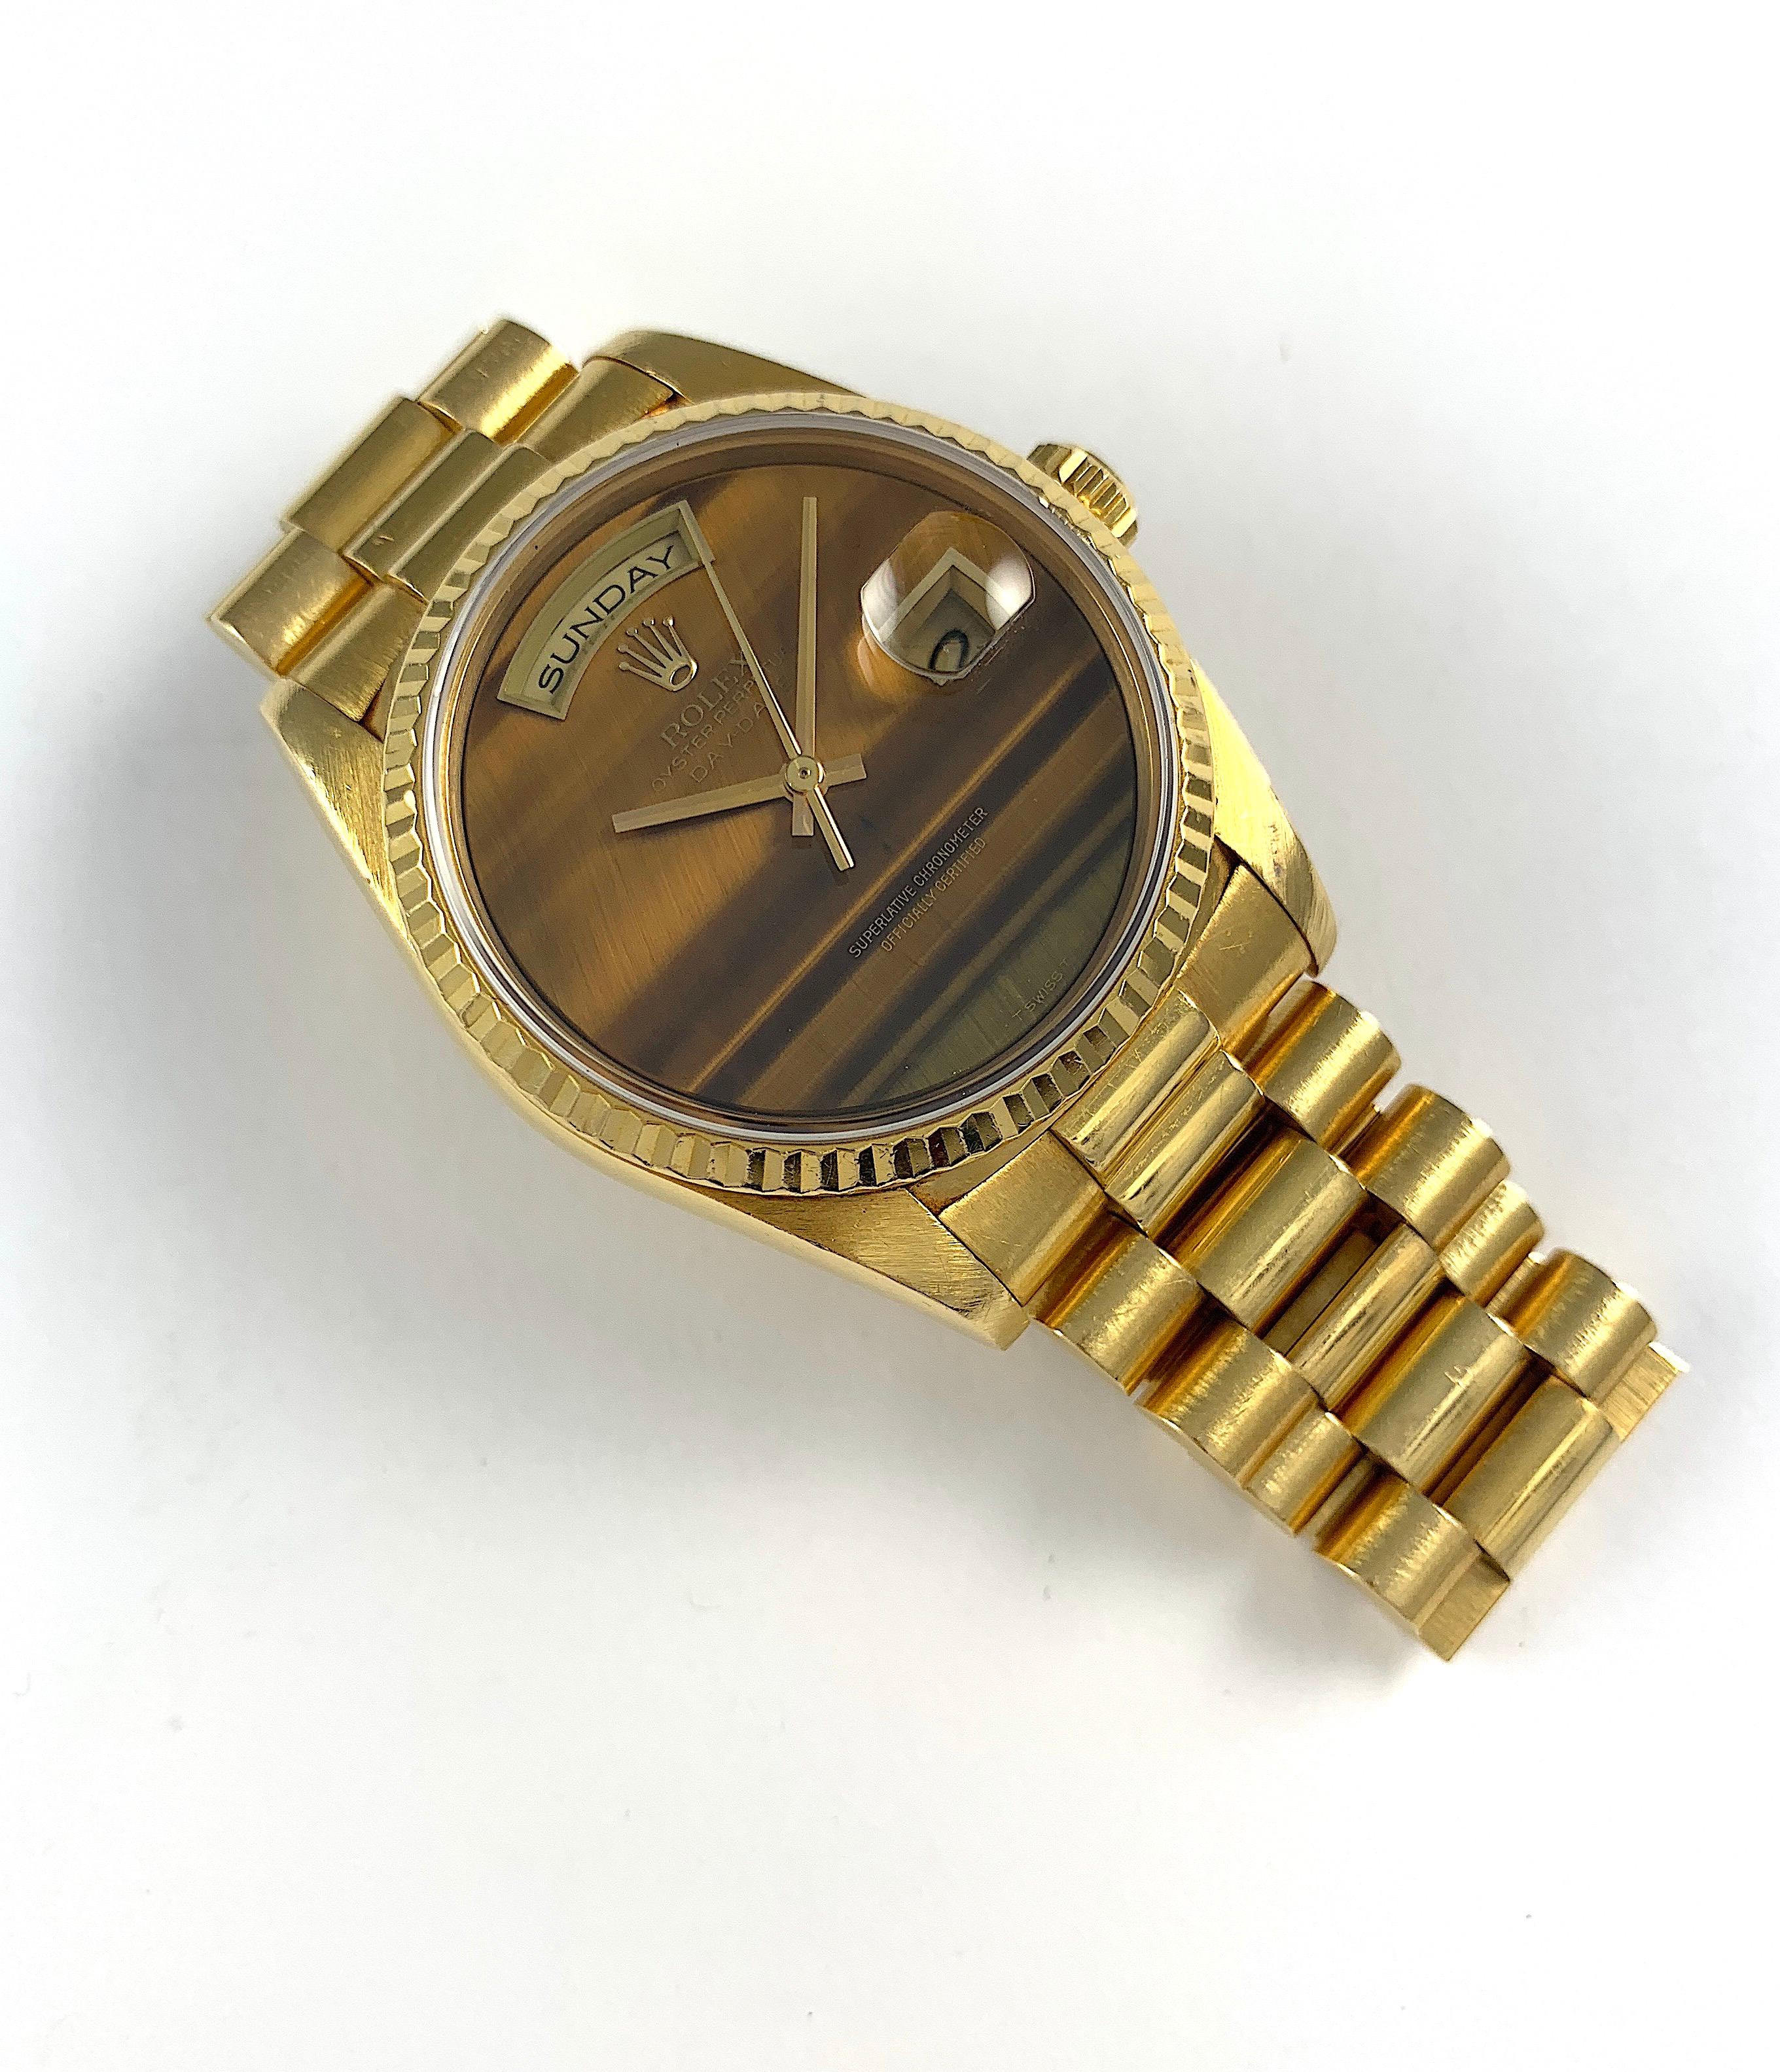 Rolex 18K Yellow Gold Day-Date Presidential Watch
Rare Factory Rolex Tiger's Eye Dial Without Hour Markers
Tiger's Eye Is One Of The Rarest Rolex Stone Dials Produced
The Dial  Has a Small Crack Seen with A Loupe and Under Magnification at Eleven